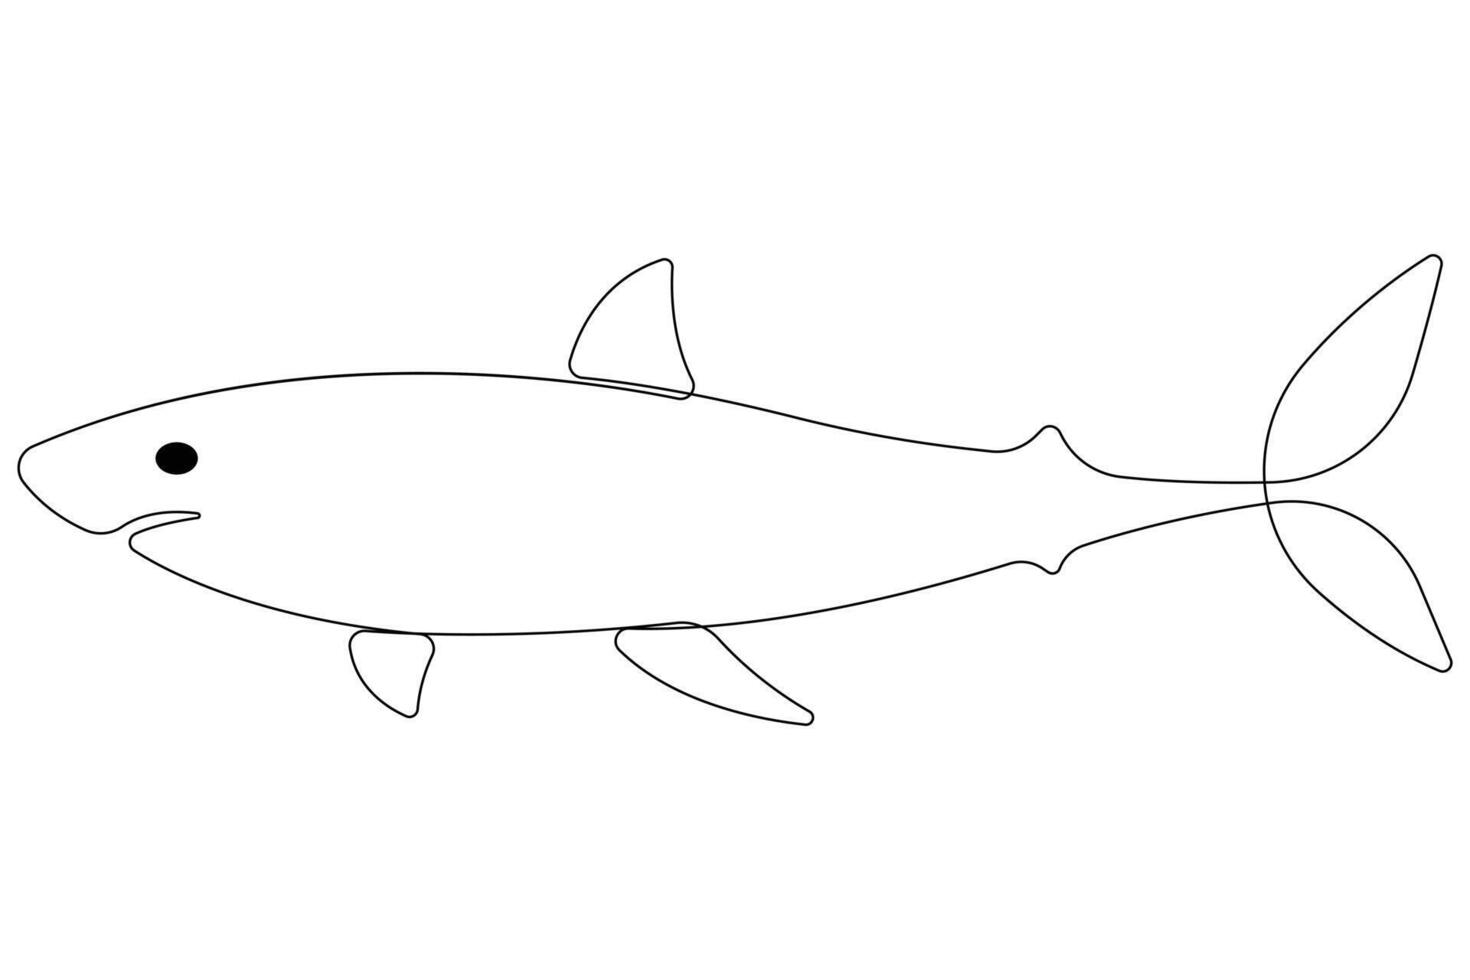 One continuous single line art drawing of shark sea fish underwater outline minimalist illustration vector